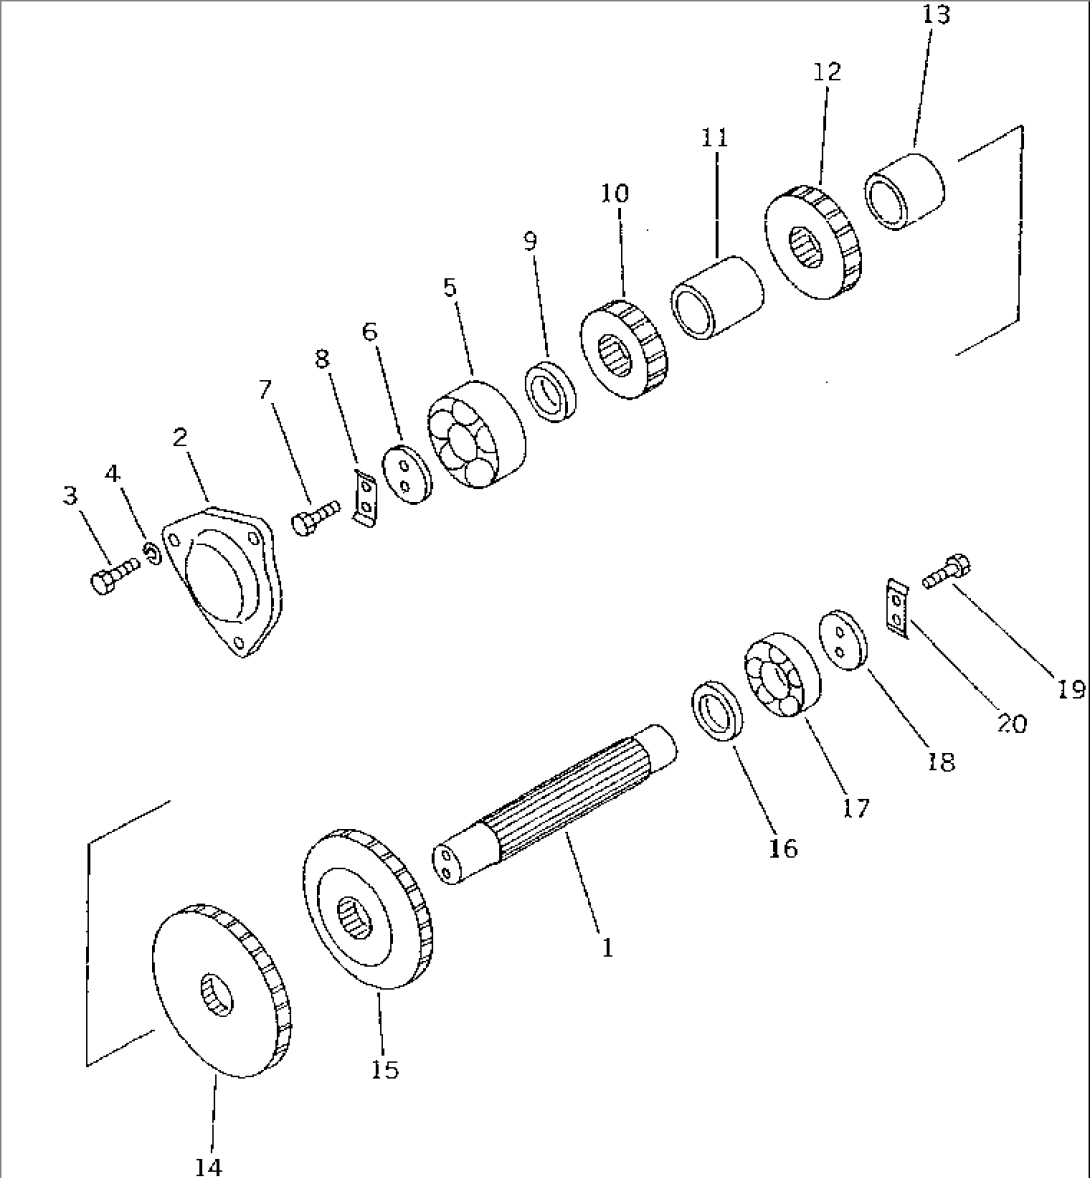 TRANSMISSION (INTERMEDIATE SHAFT AND GEAR) (3/5) (WITH BACK-UP SWITCH)